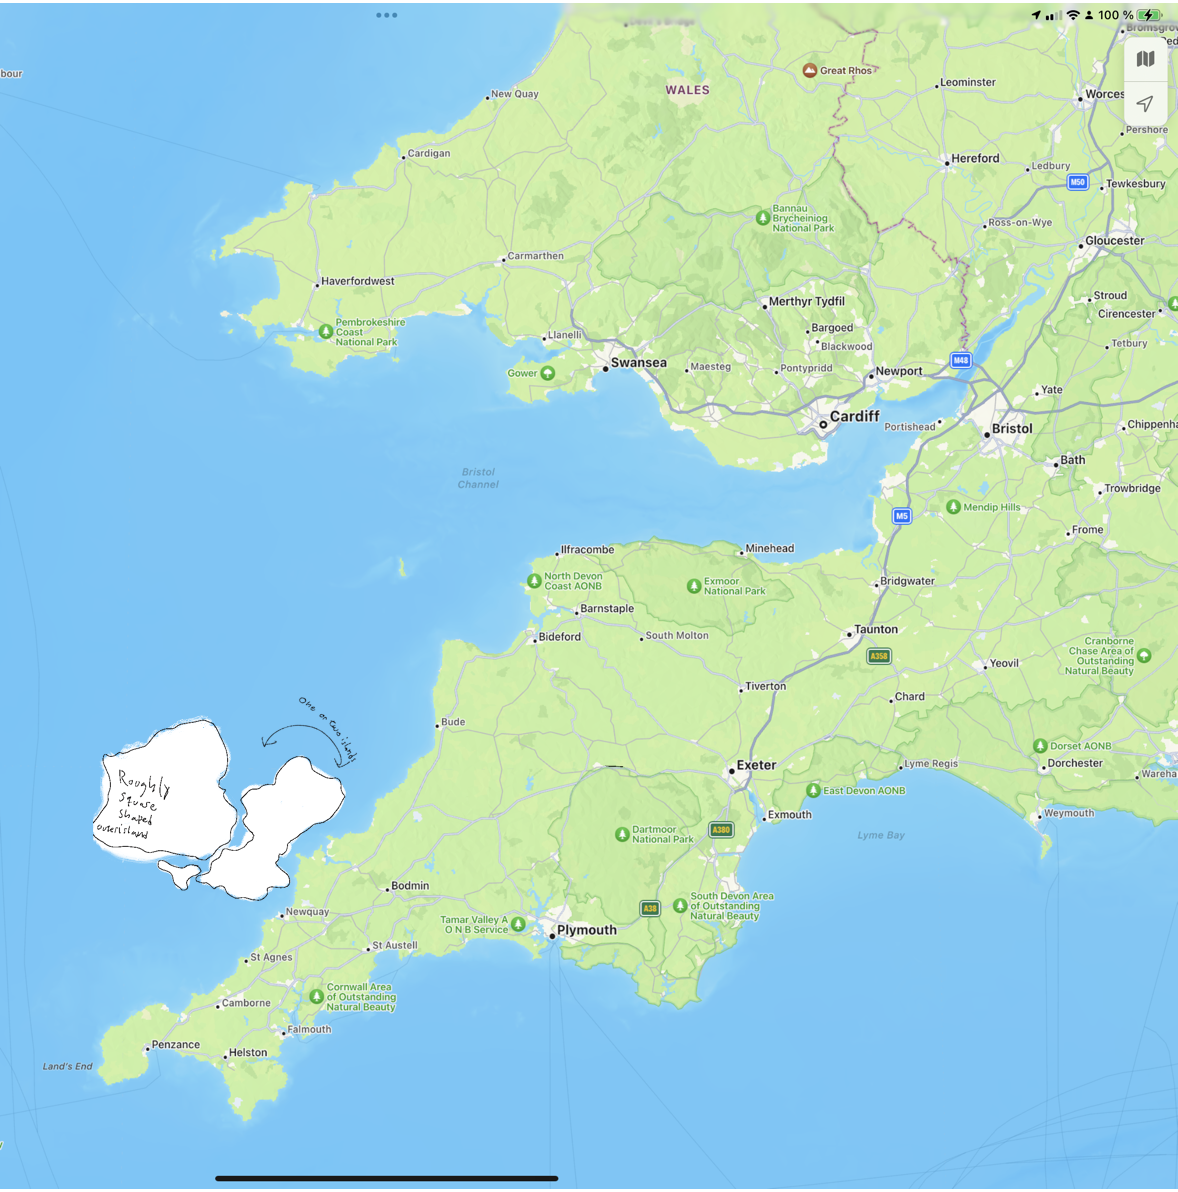 Apple maps screenshot of Cornwall with my hand drawn island added just off the coast just a bit north of Newquay